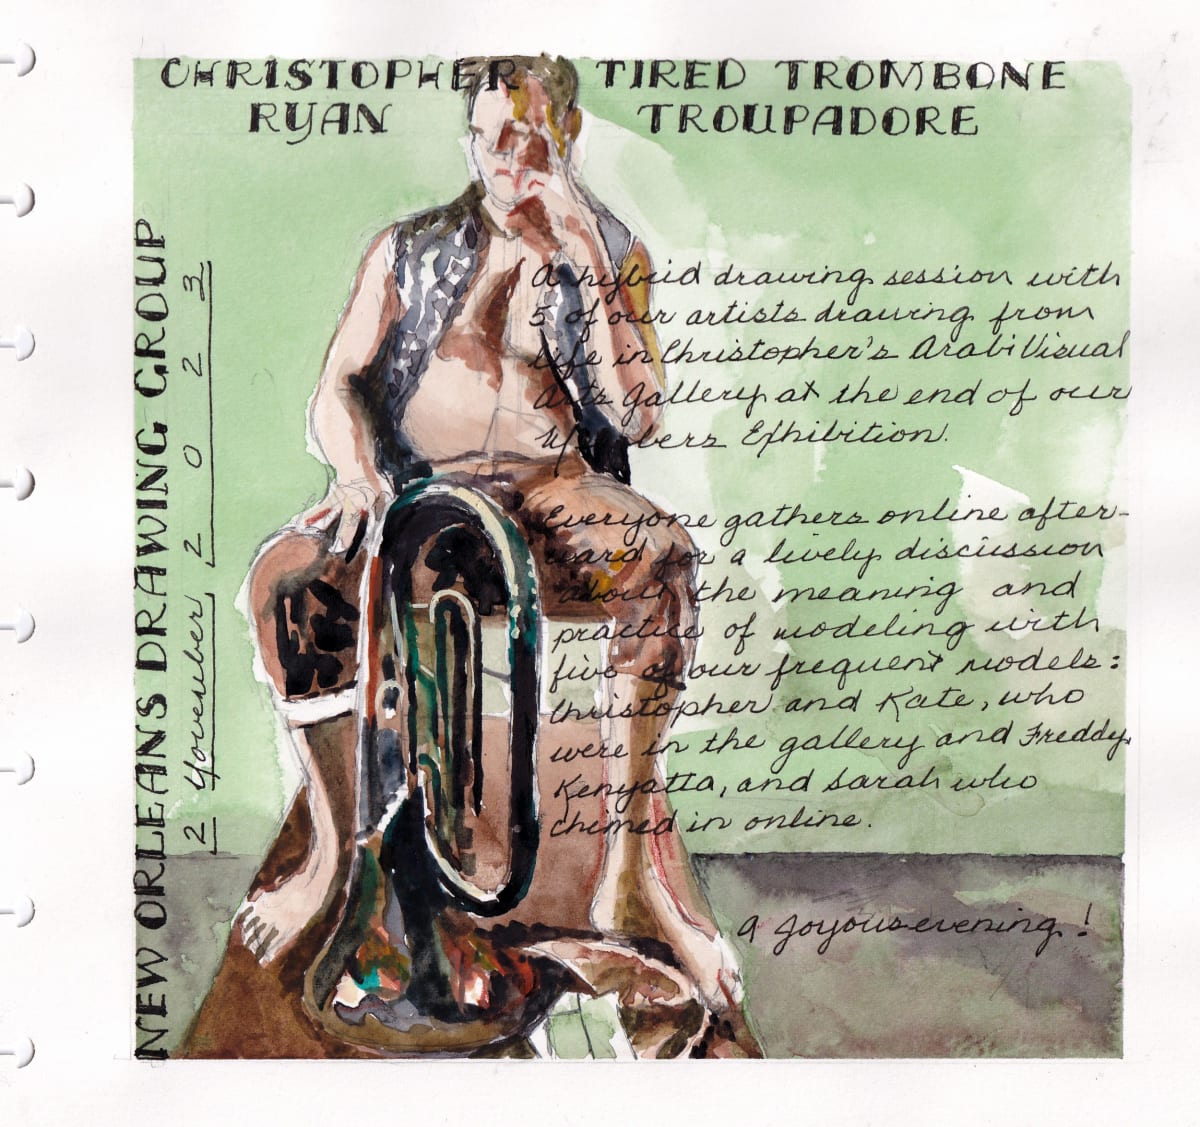 Journey Daybook Page by Margaret Pulis Herrick (Peggy)  Image: Christopher Ryan poses from New Orleans with a trombone.